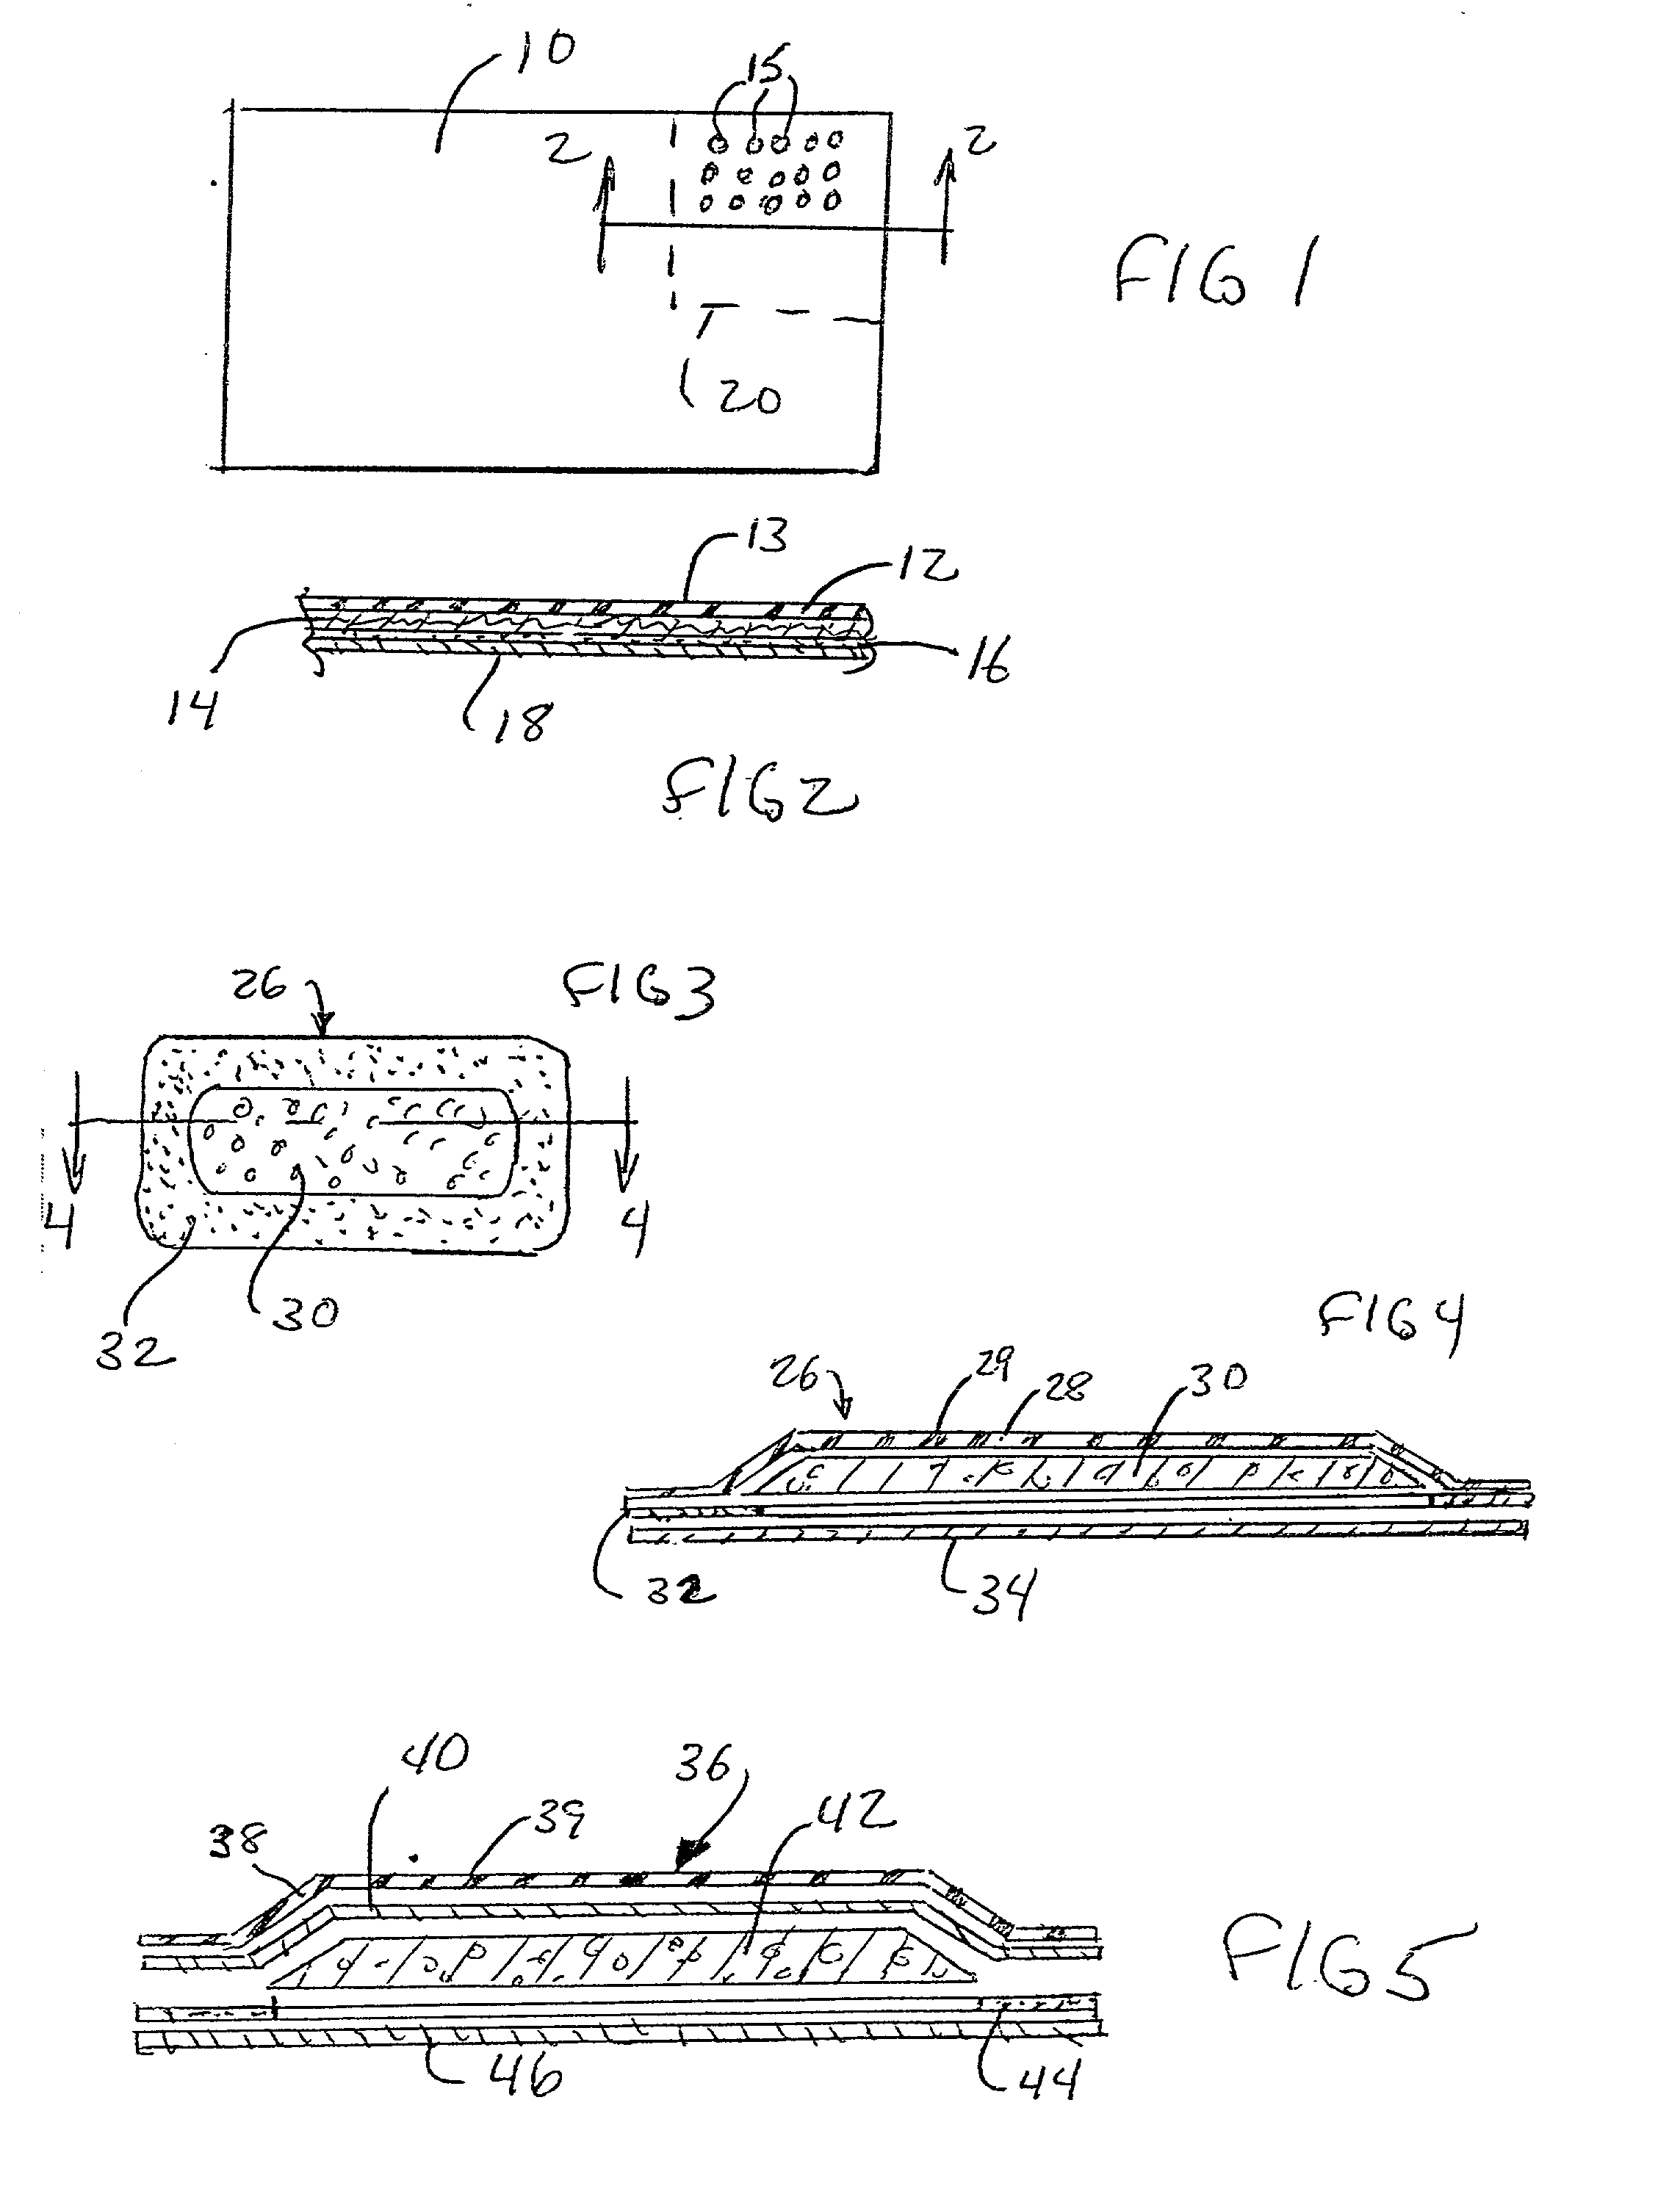 Self-adhering friction reducing liner and method of use